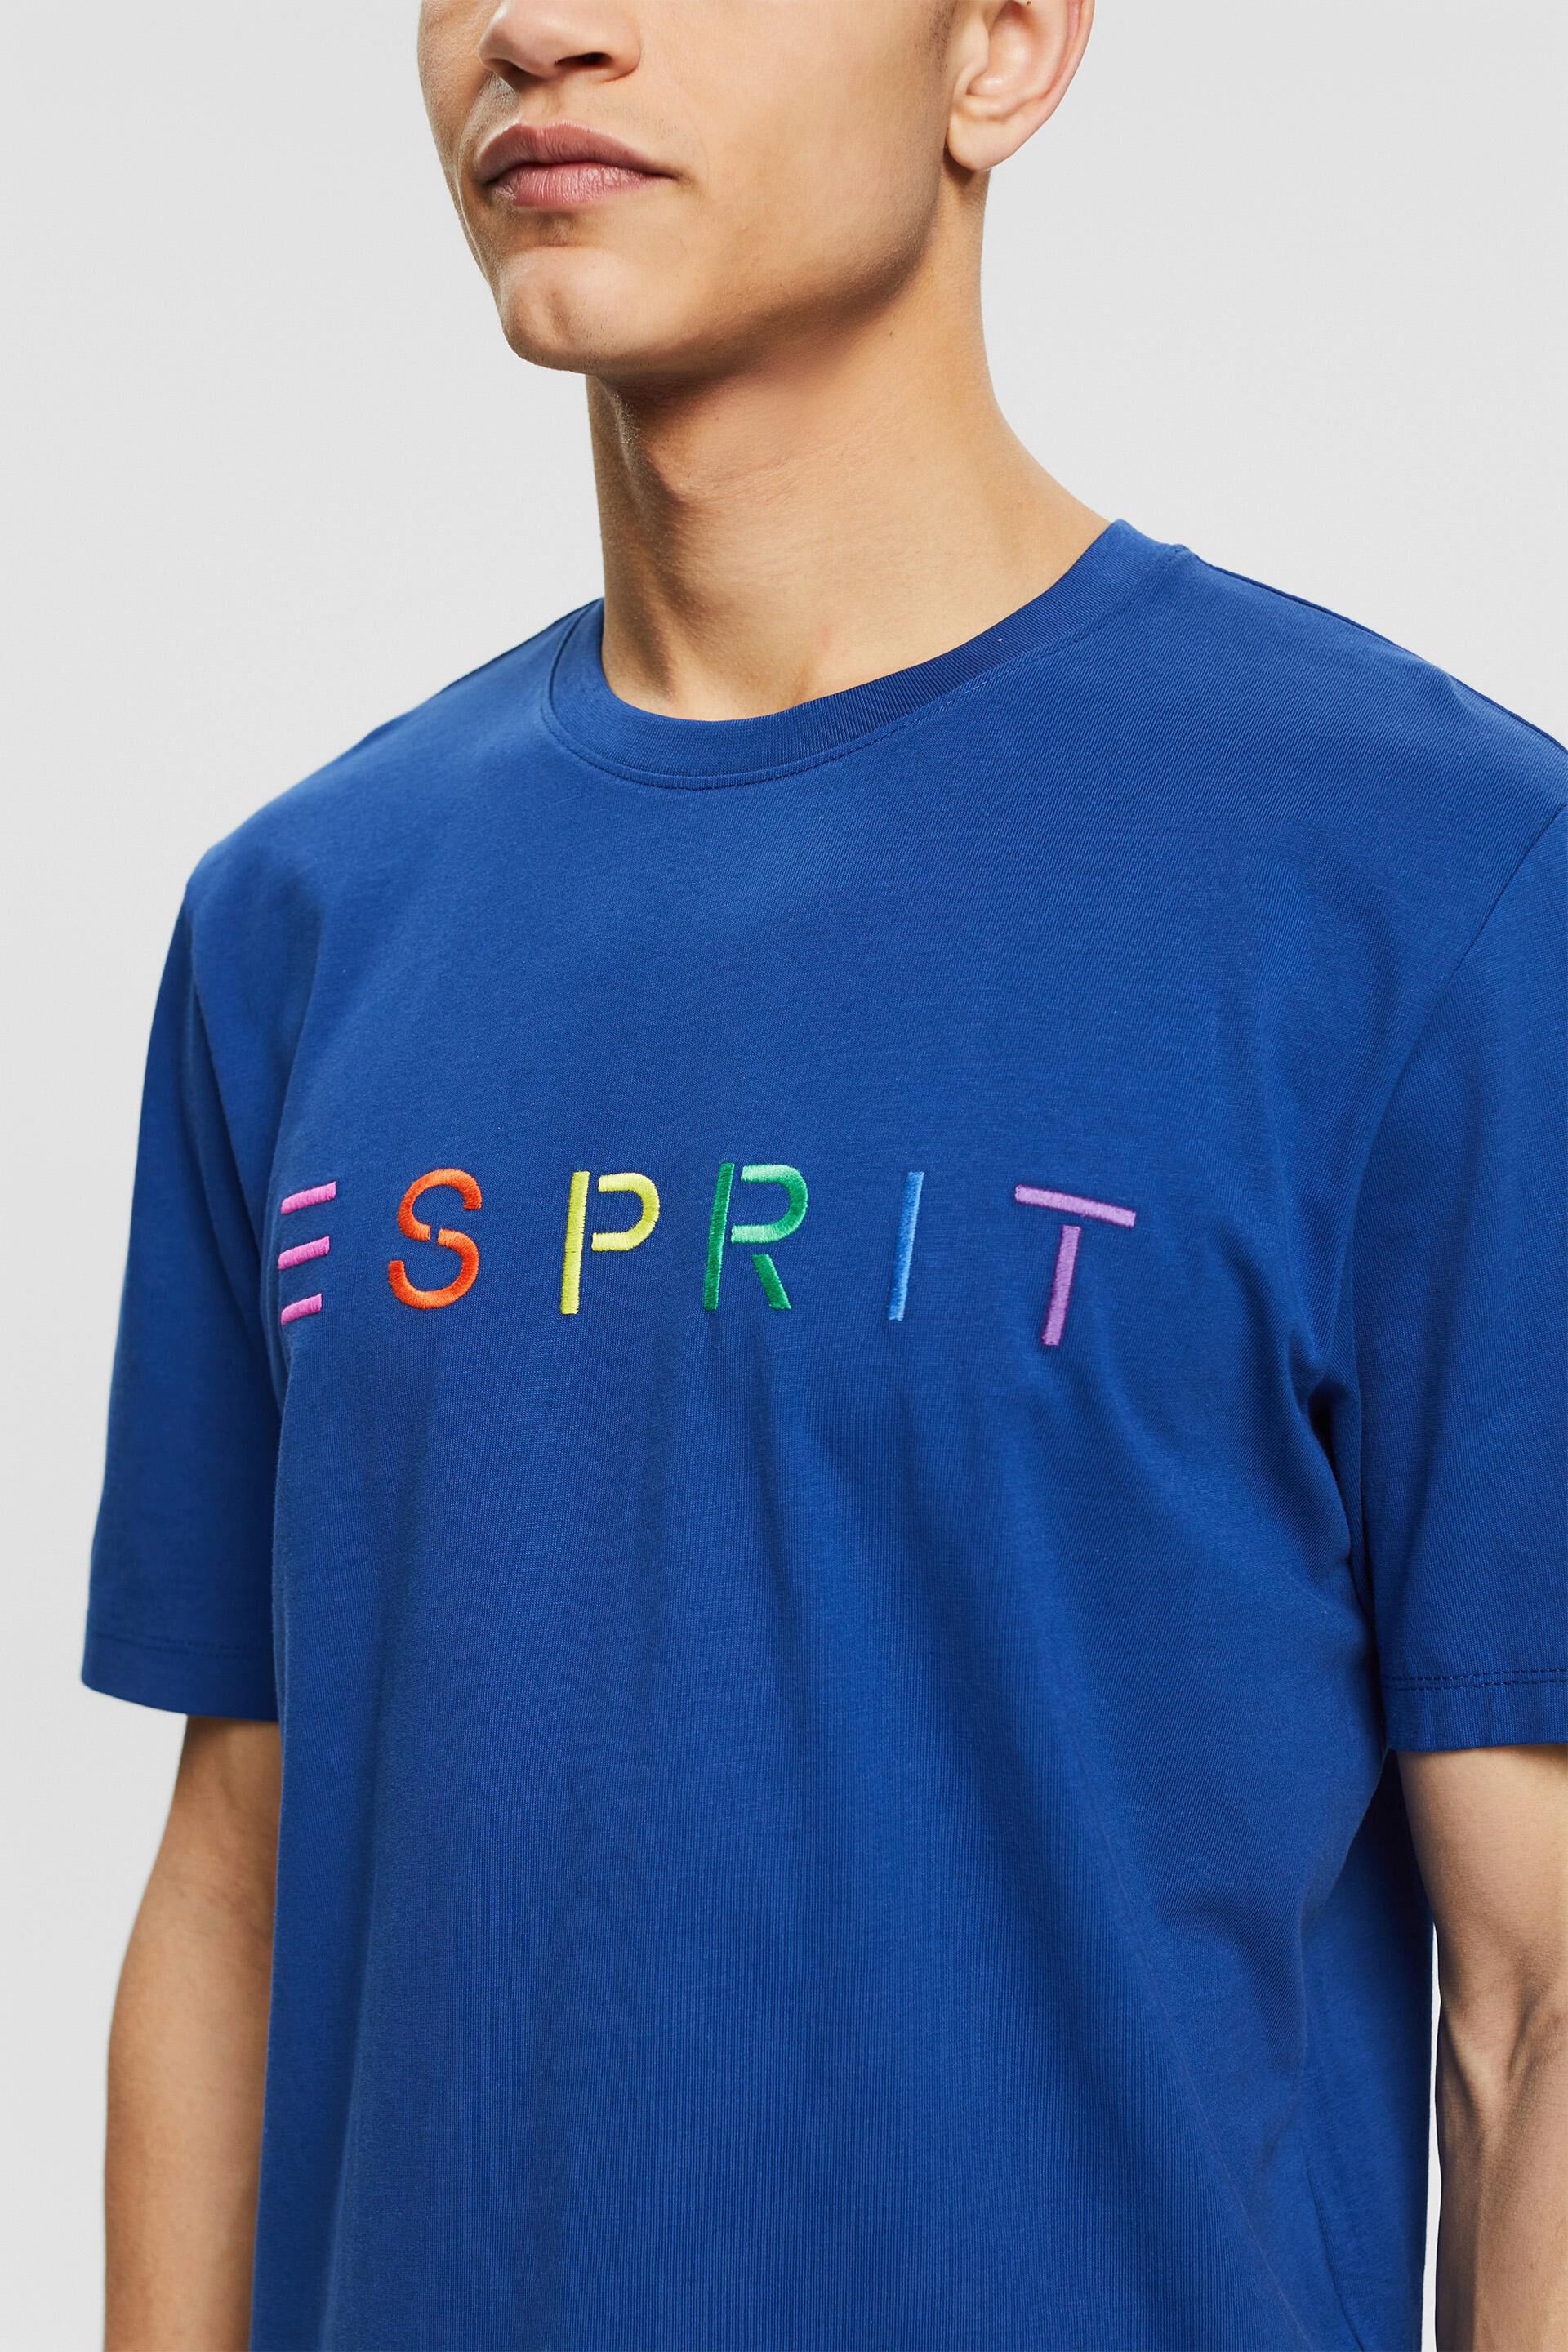 Esprit logo t-shirt with Jersey embroidered